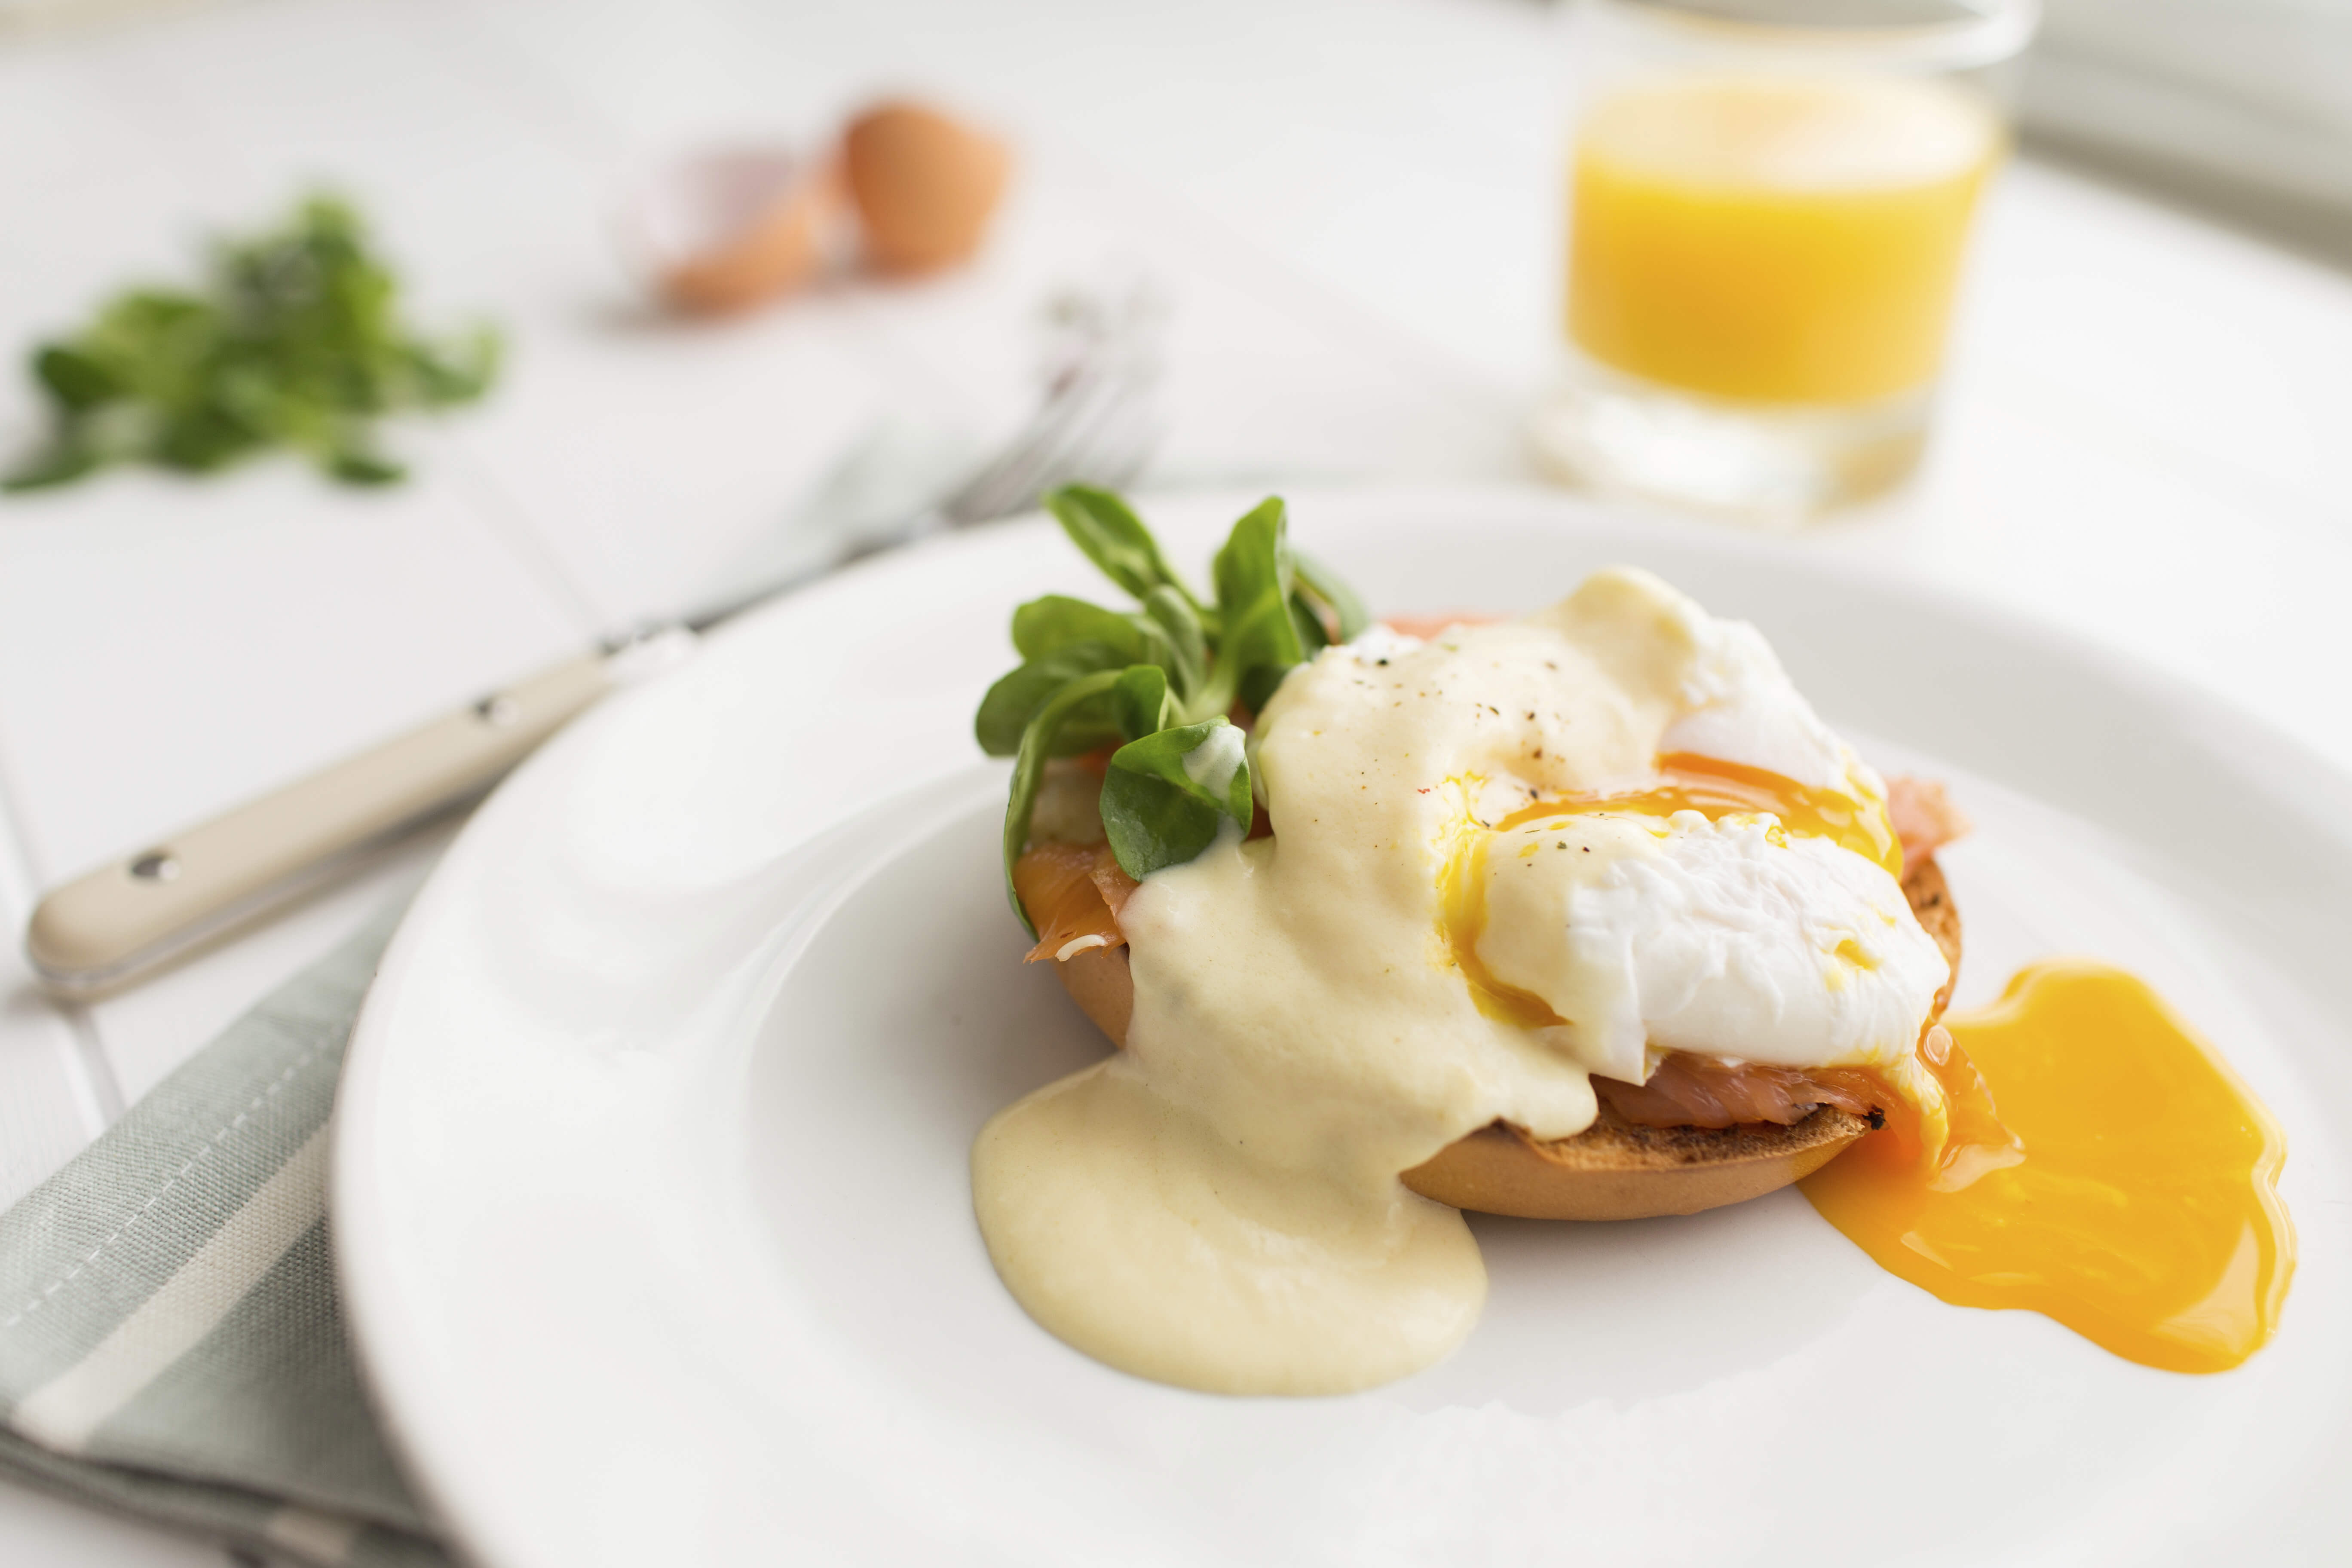 A typical brunch dish: poached eggs royale and orange juice. 